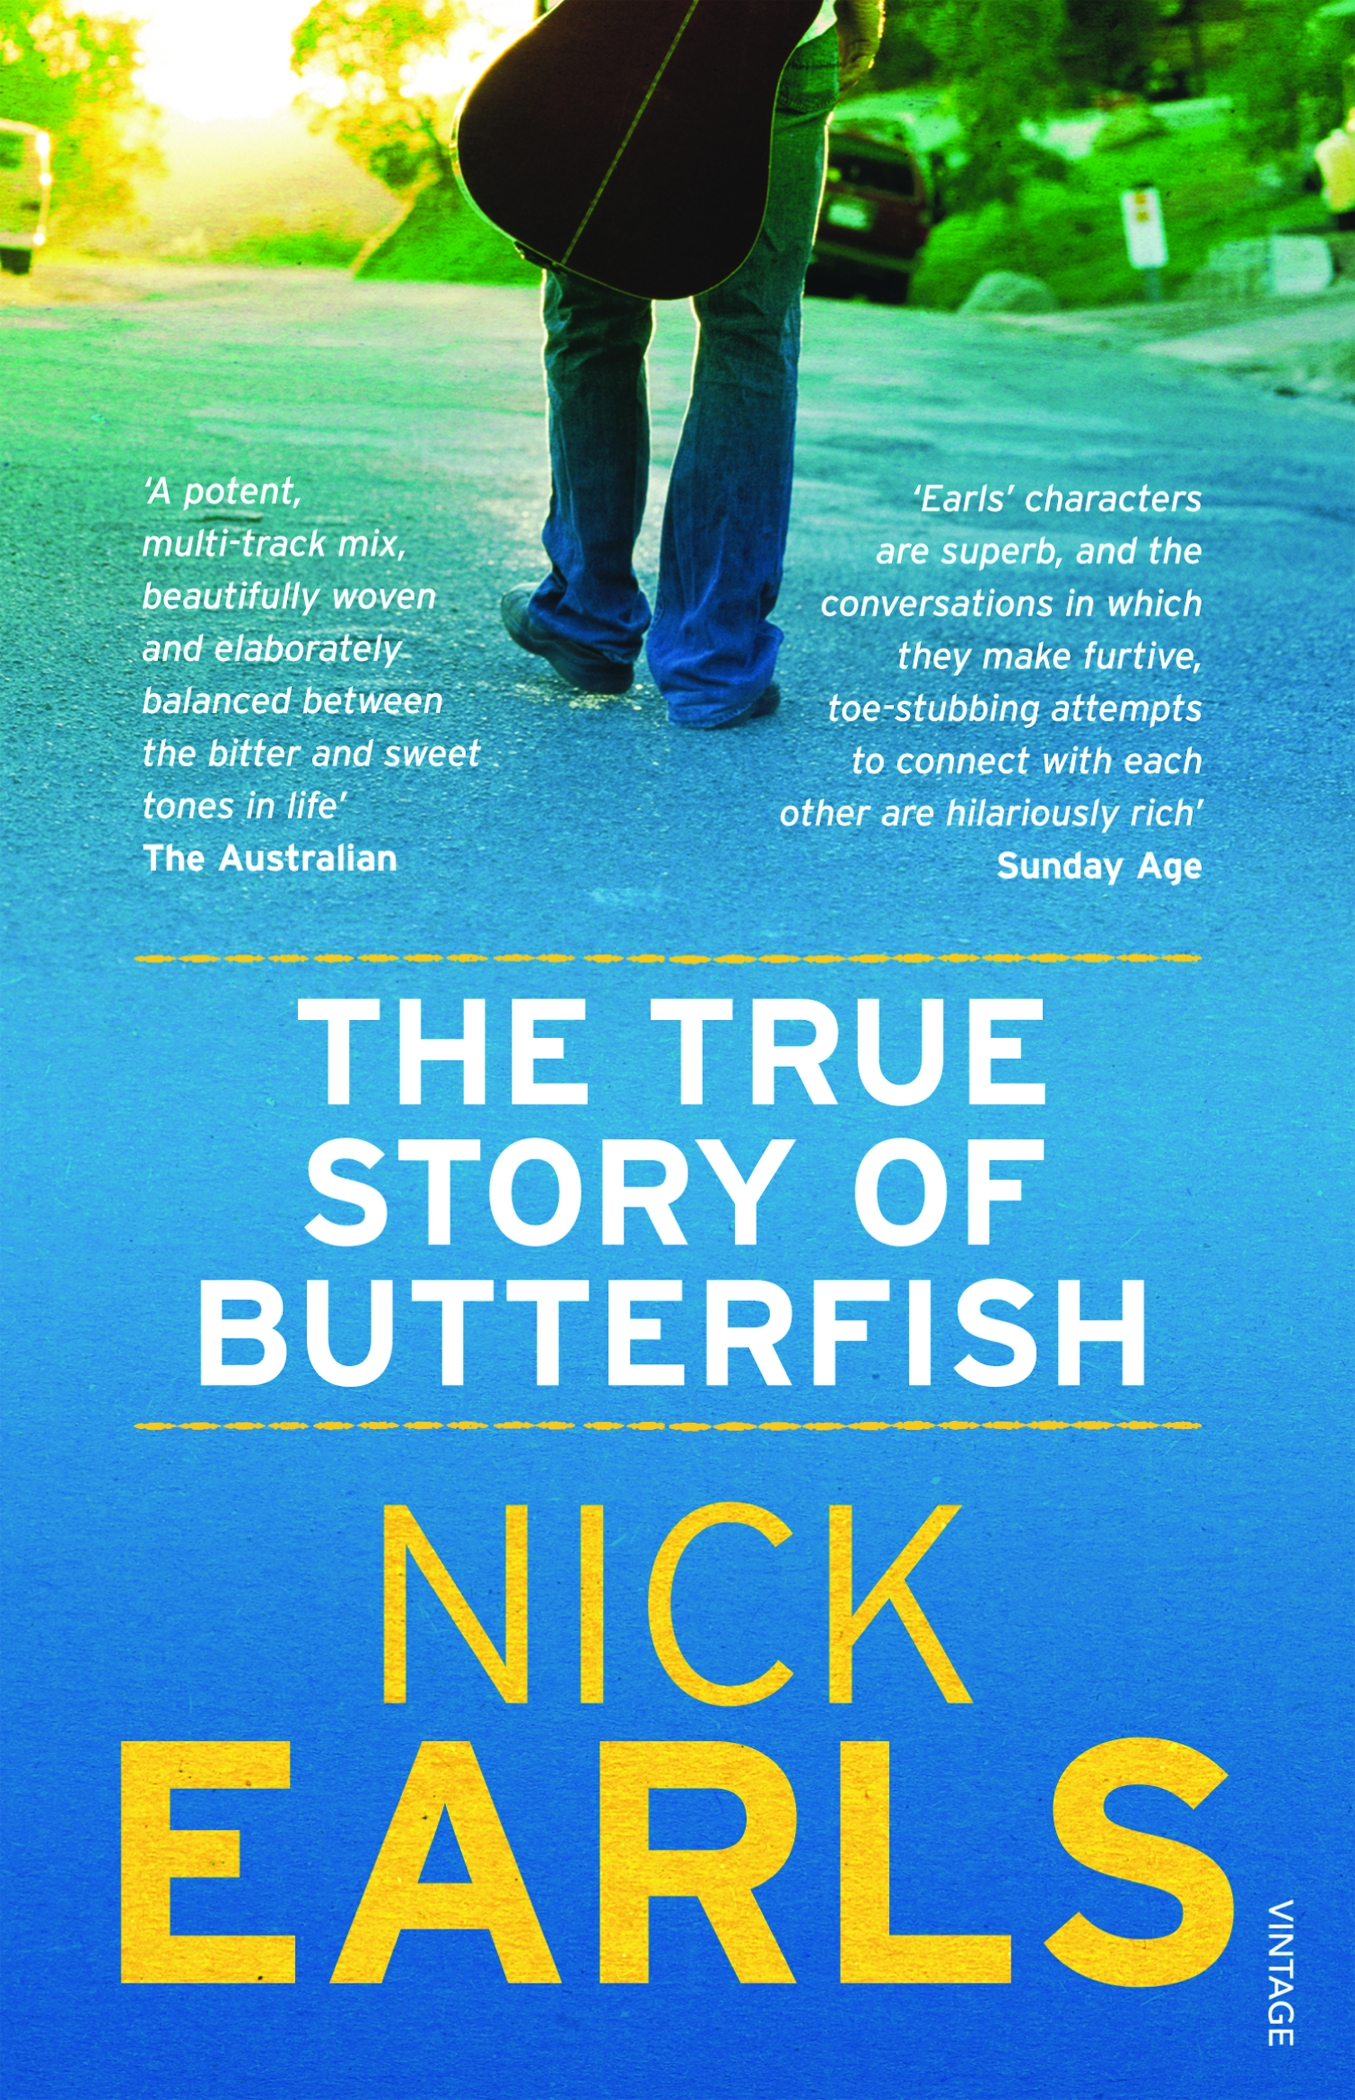 The True Story of Butterfish (2009) by Nick Earls